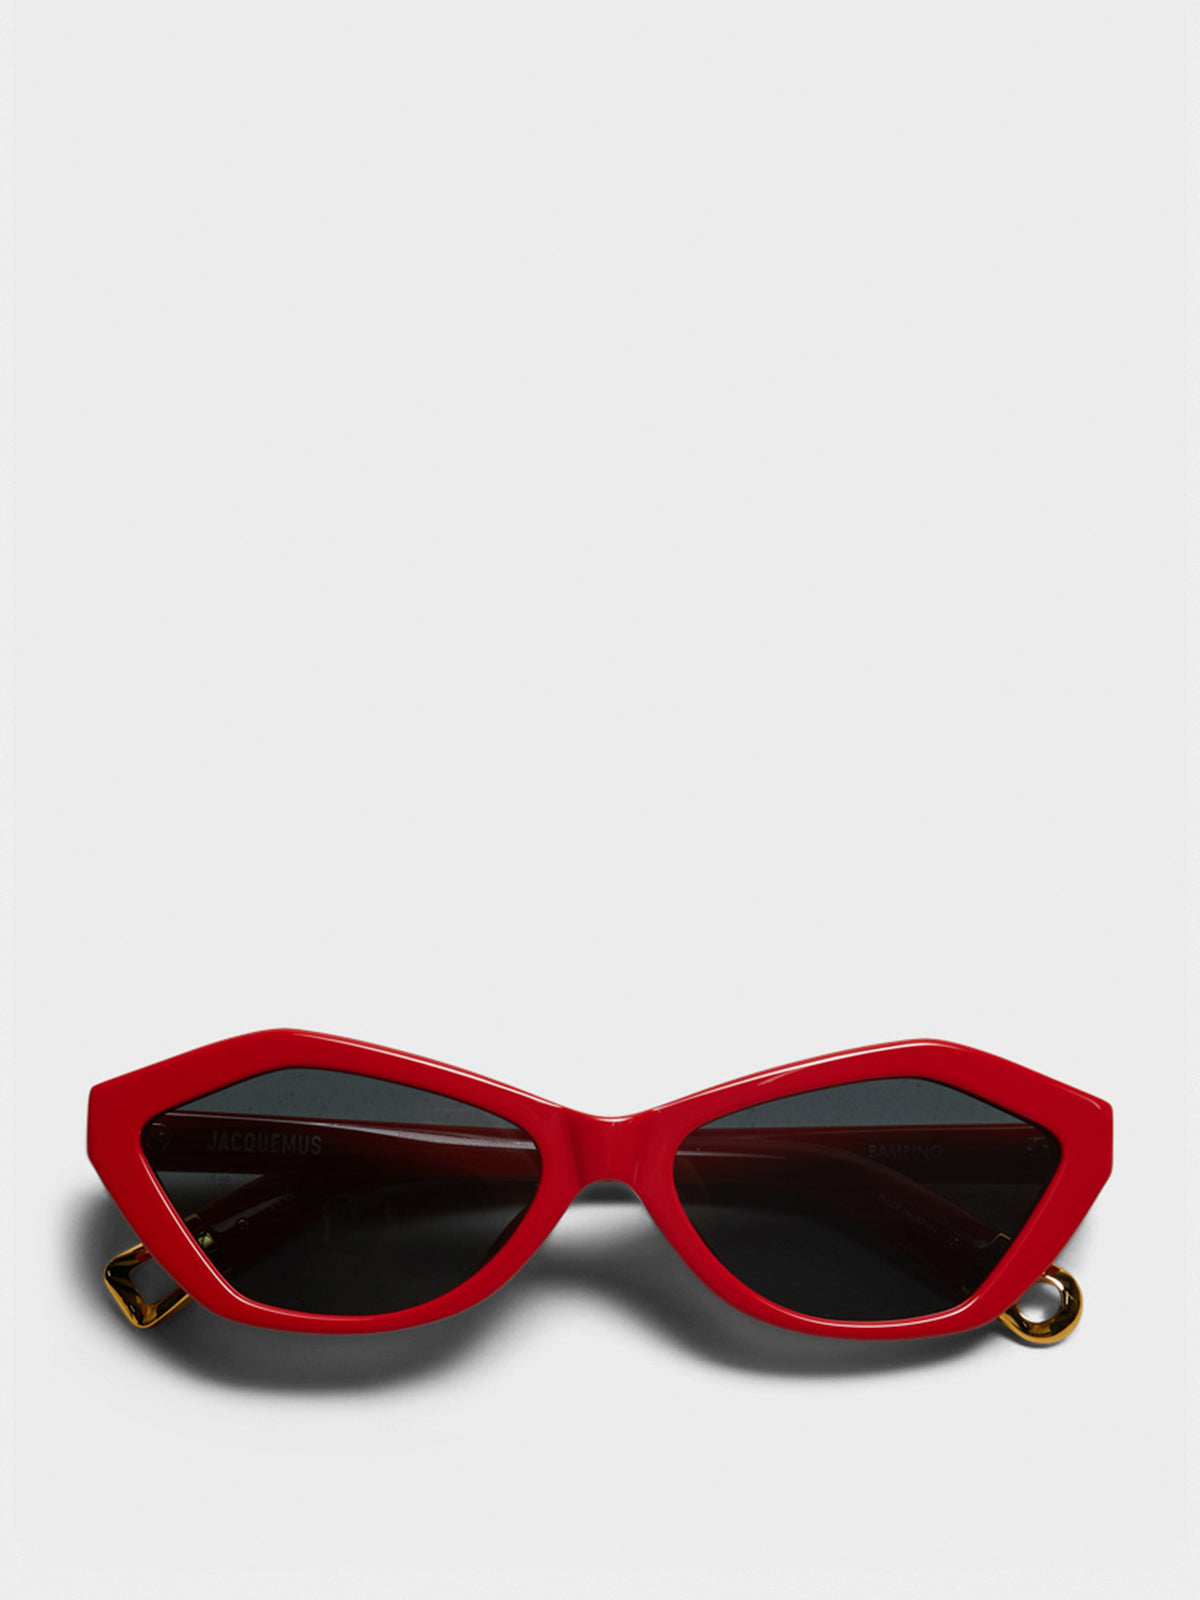 Bambino Sunglasses in Red, Yellow Gold and Grey